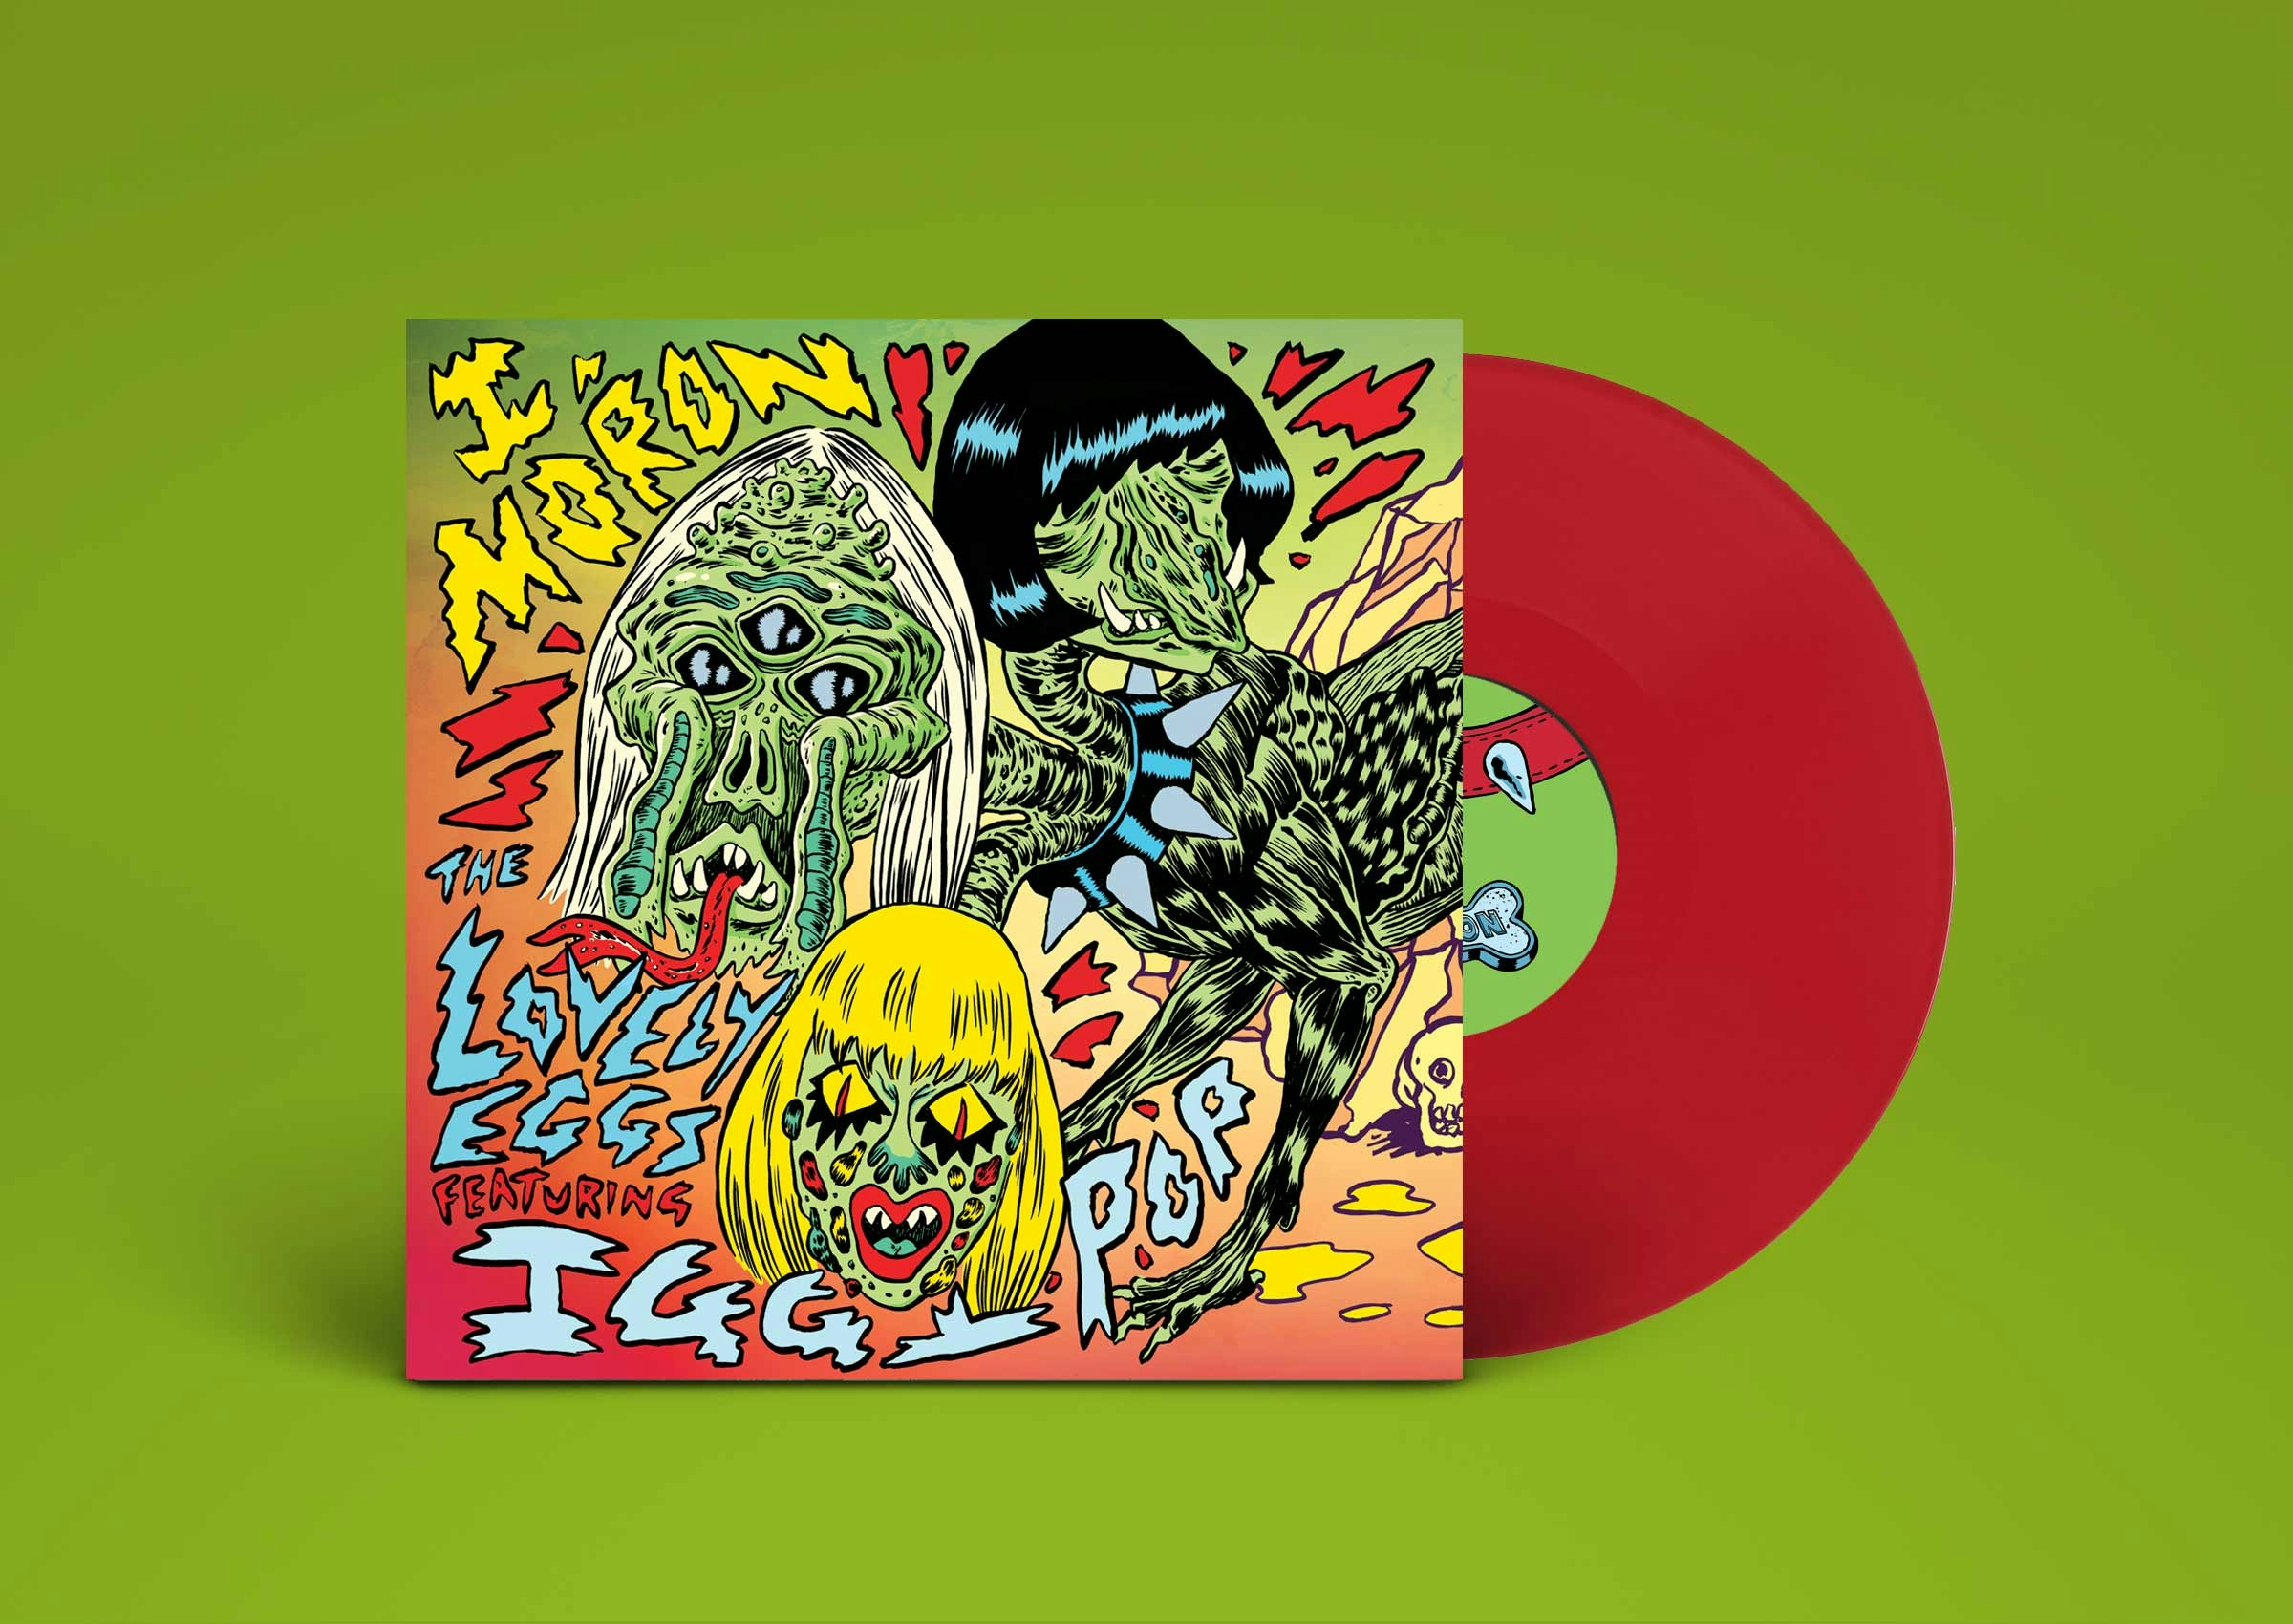 Album artwork for I Moron by The Lovely Eggs Featuring Iggy Pop 